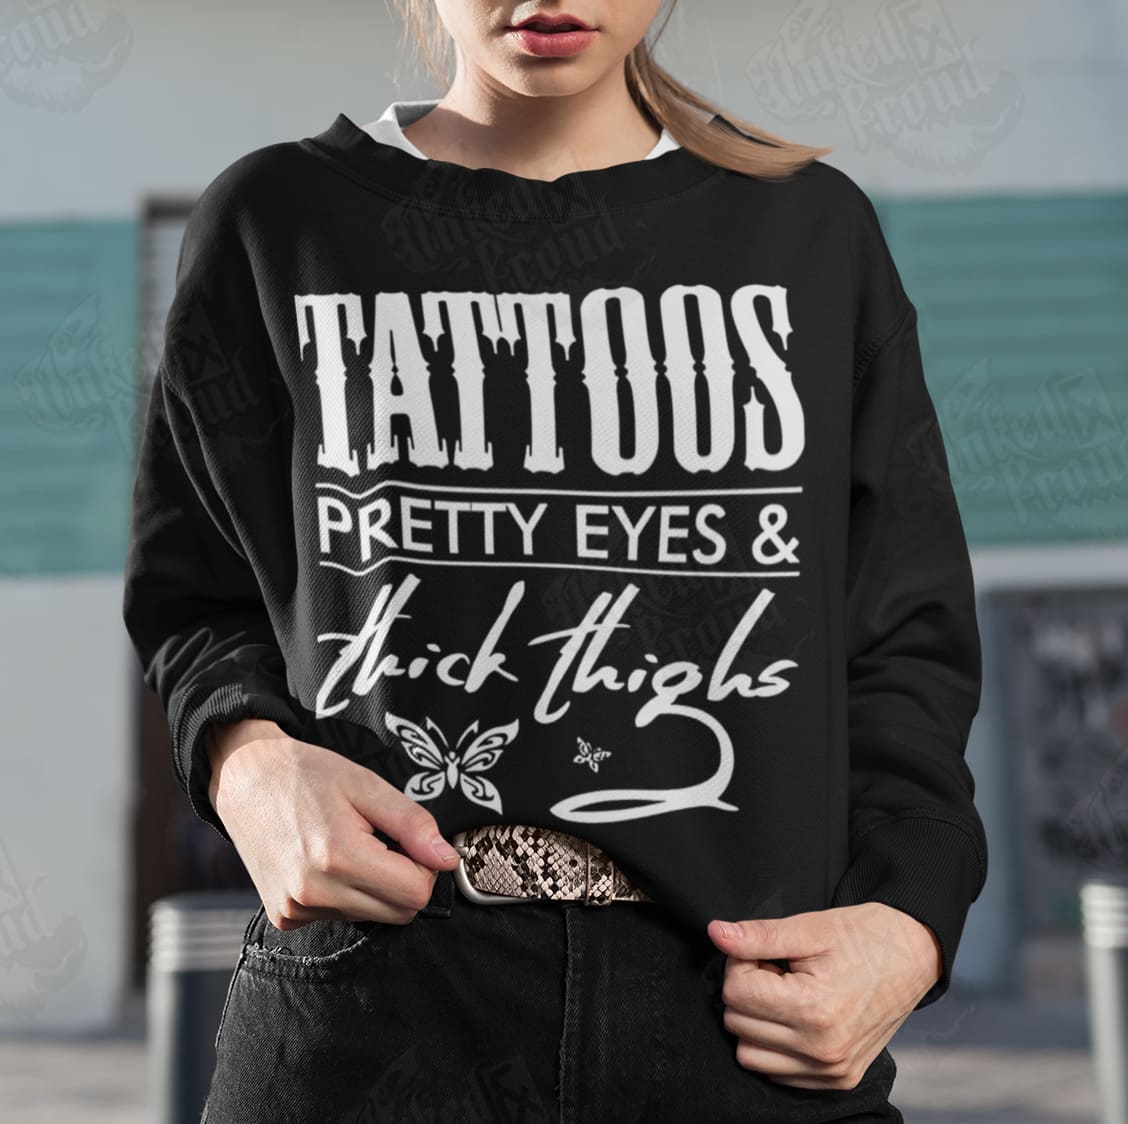 Tattoos T-shirt - Pretty eyes, thick thighs, gift for tattoo lover